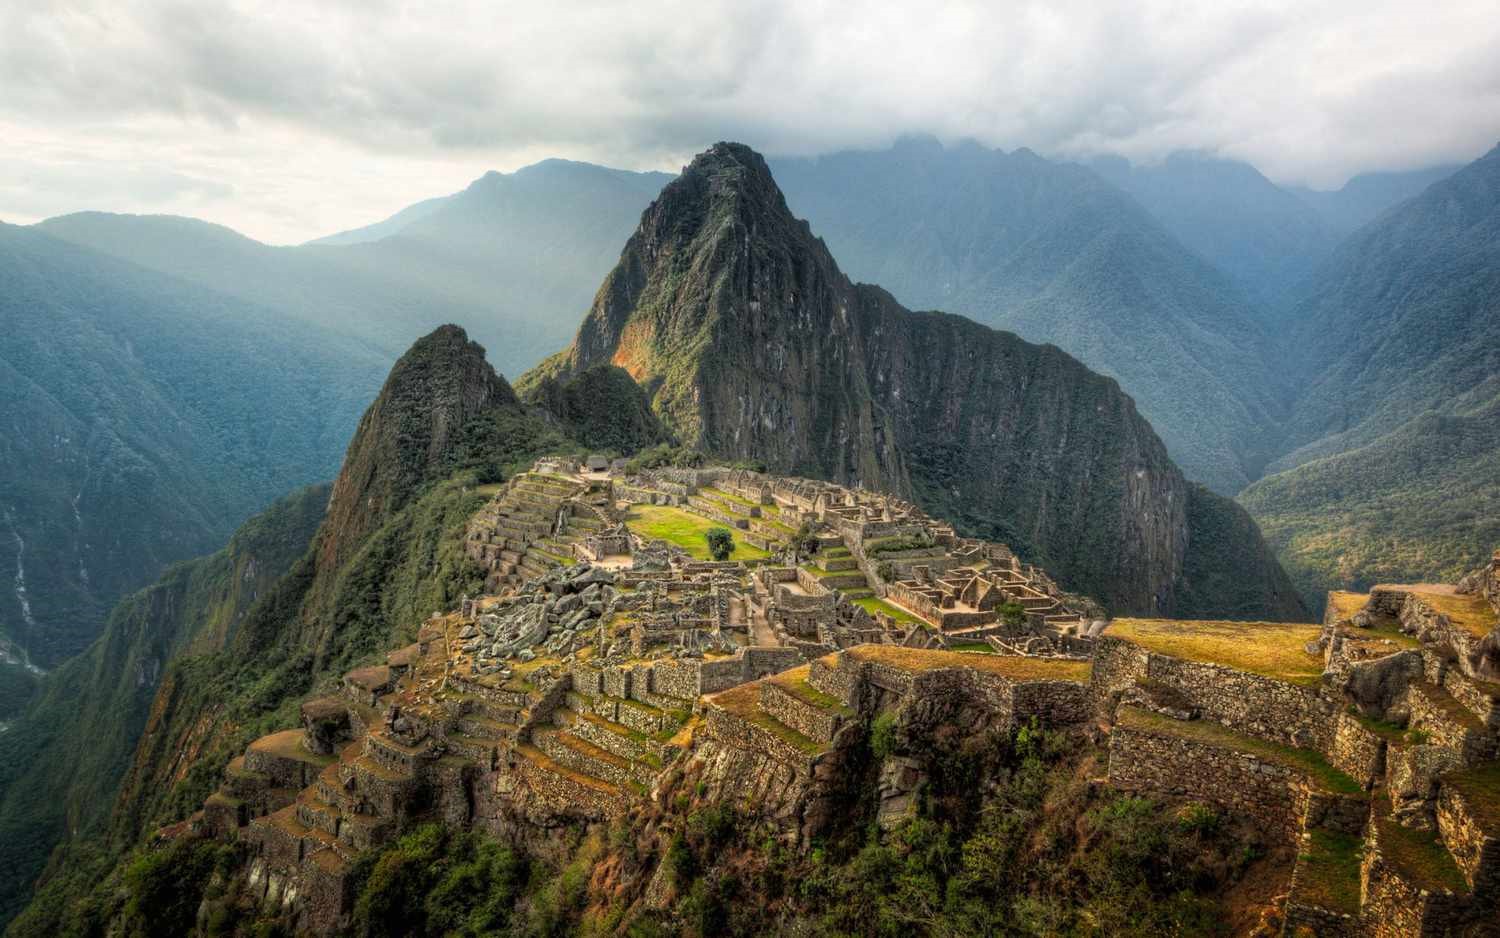 Machu Picchu – One of the best beautiful places in the world